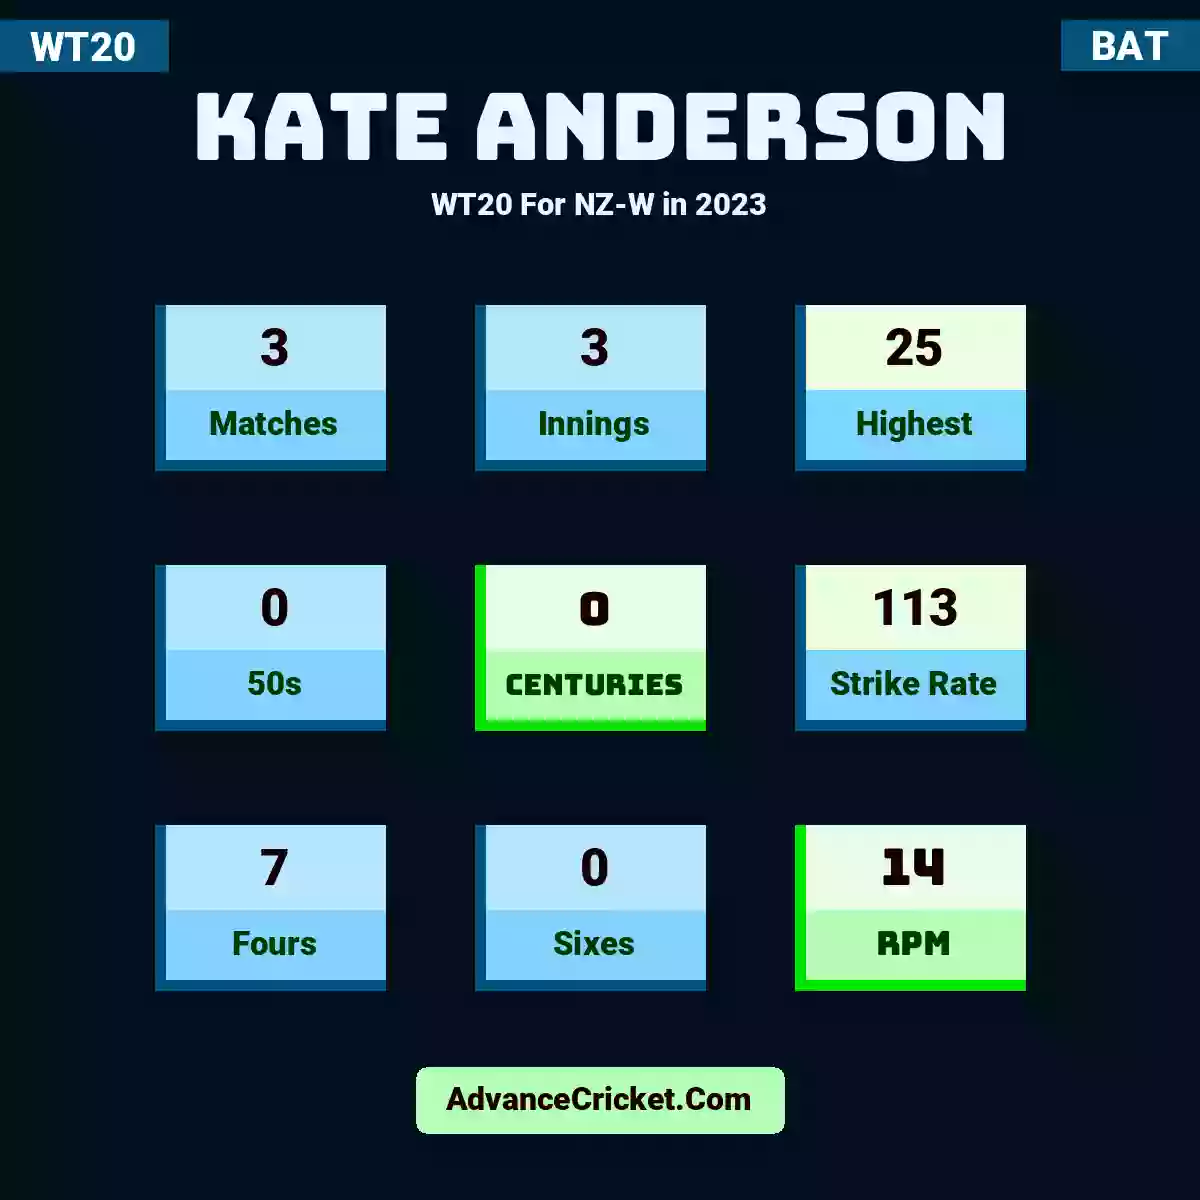 Kate Anderson WT20  For NZ-W in 2023, Kate Anderson played 3 matches, scored 25 runs as highest, 0 half-centuries, and 0 centuries, with a strike rate of 113. K.Anderson hit 7 fours and 0 sixes, with an RPM of 14.